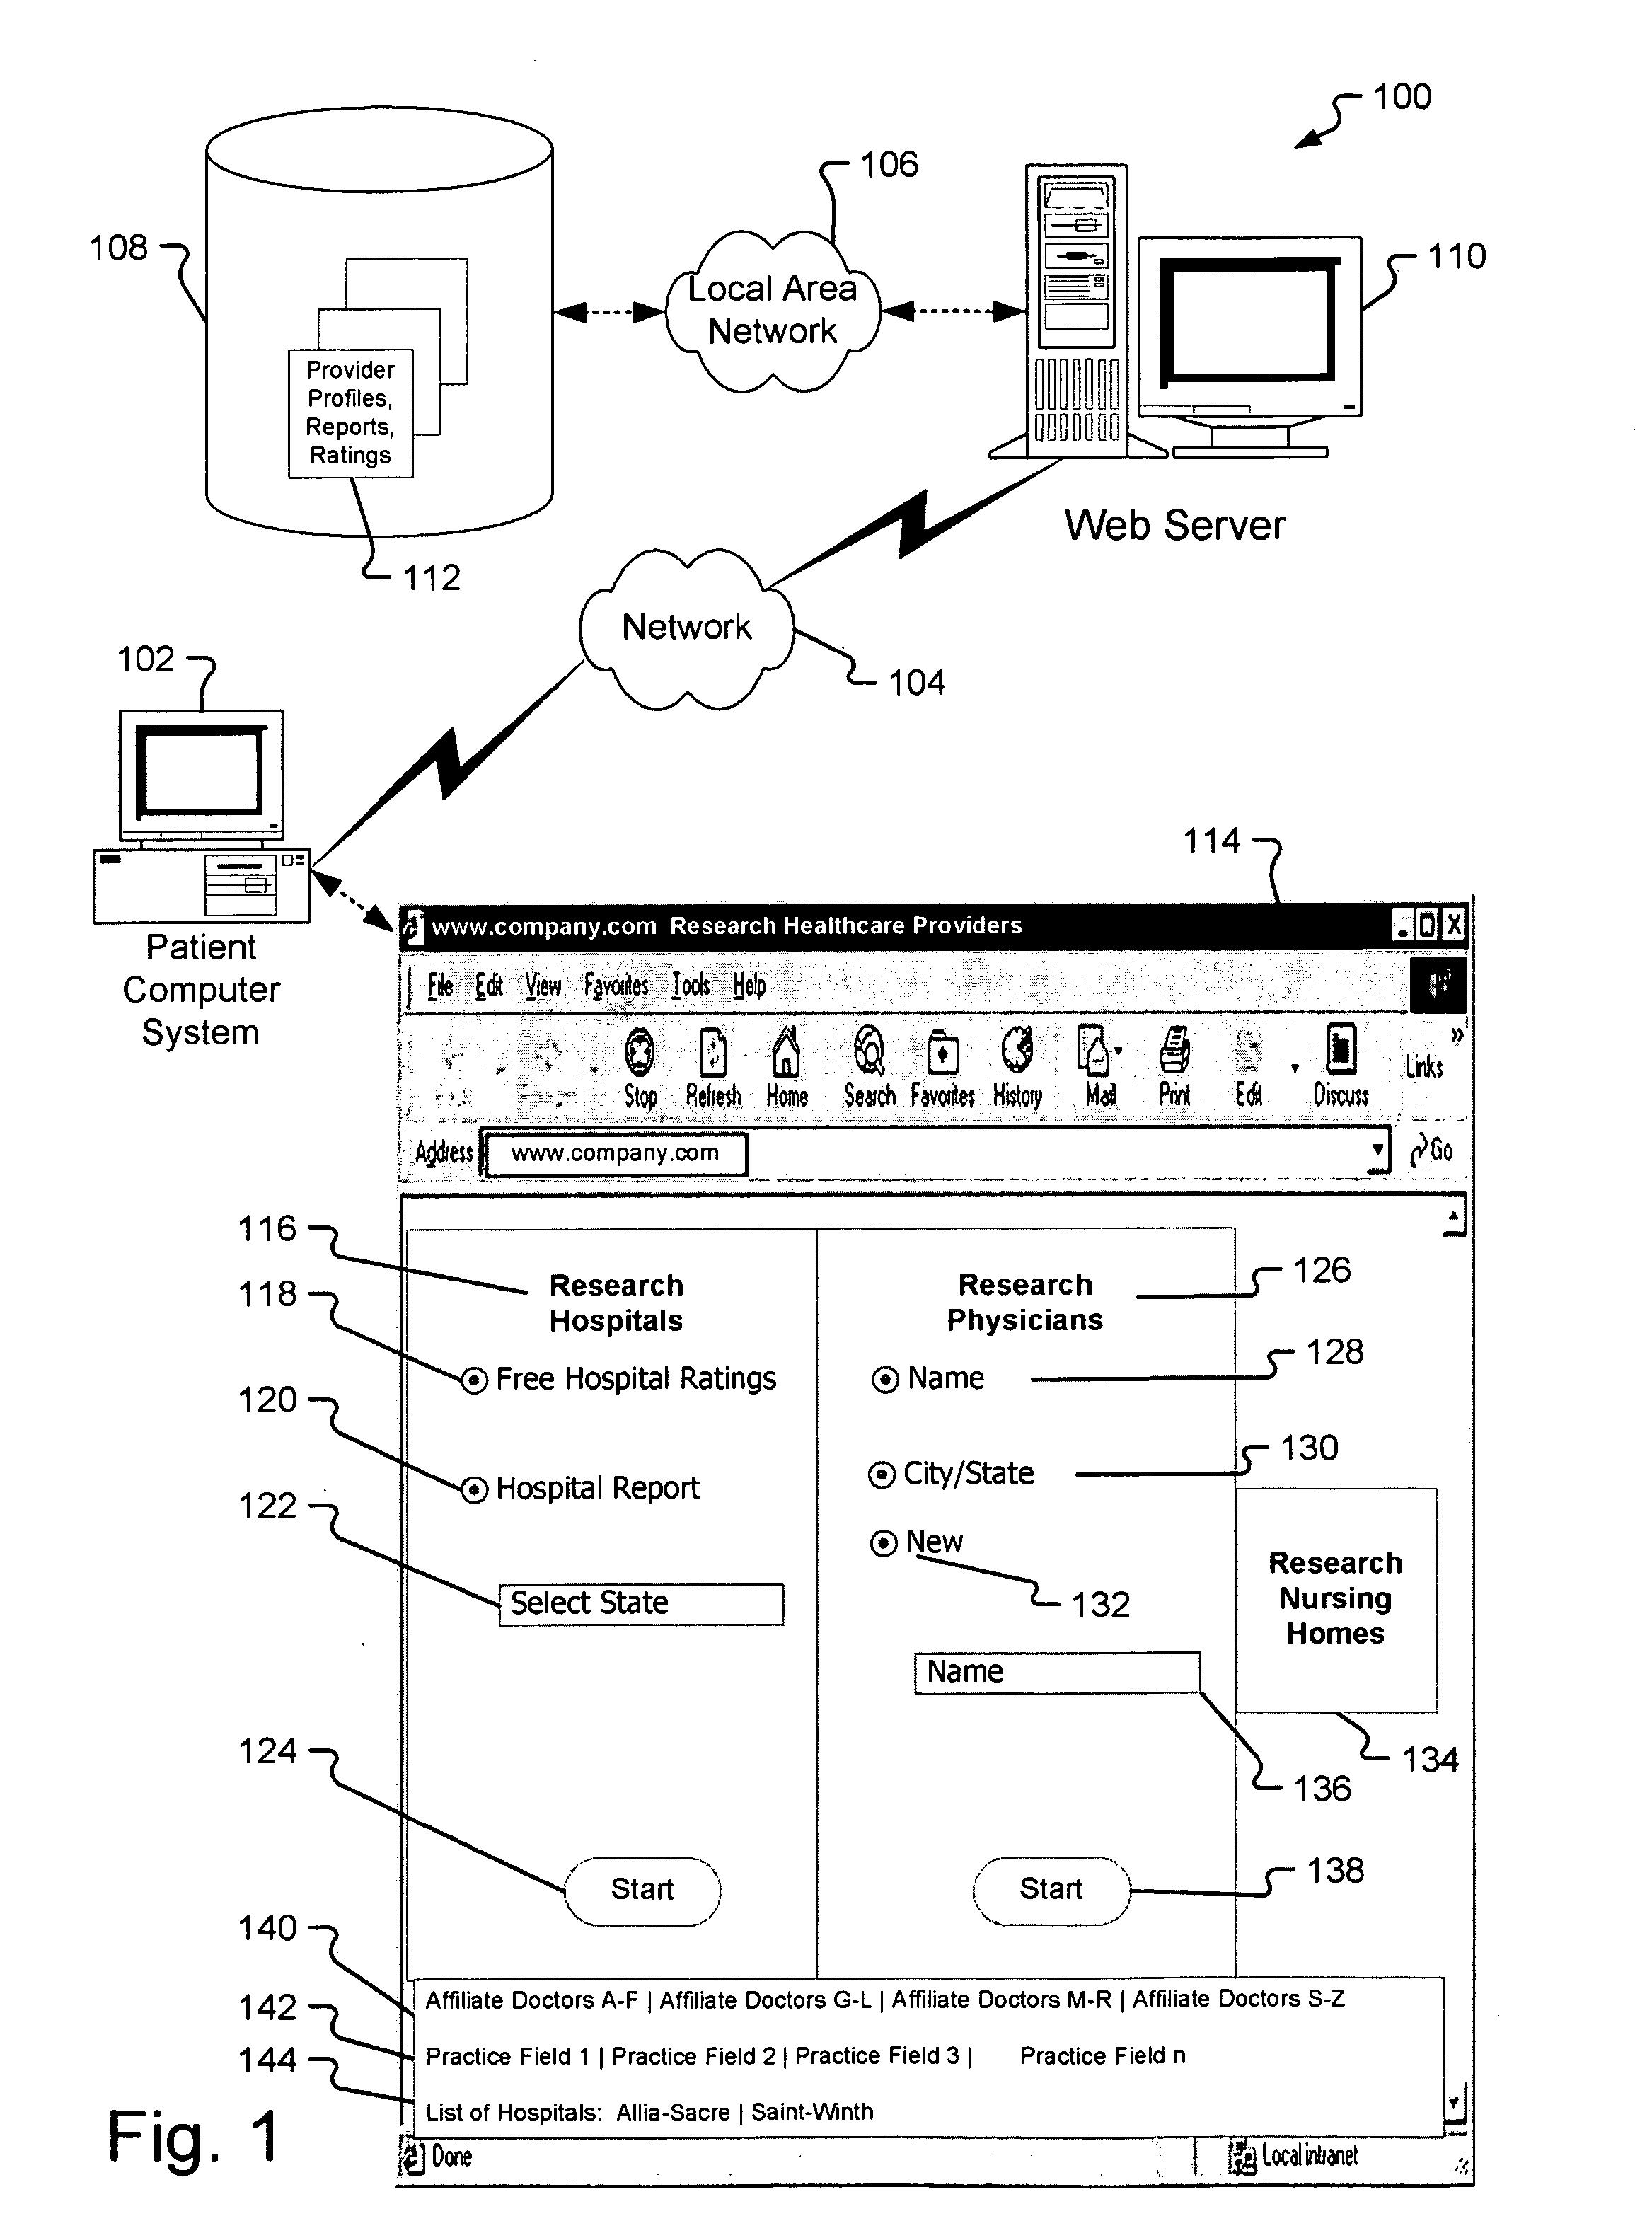 Internet system for connecting healthcare providers and patients